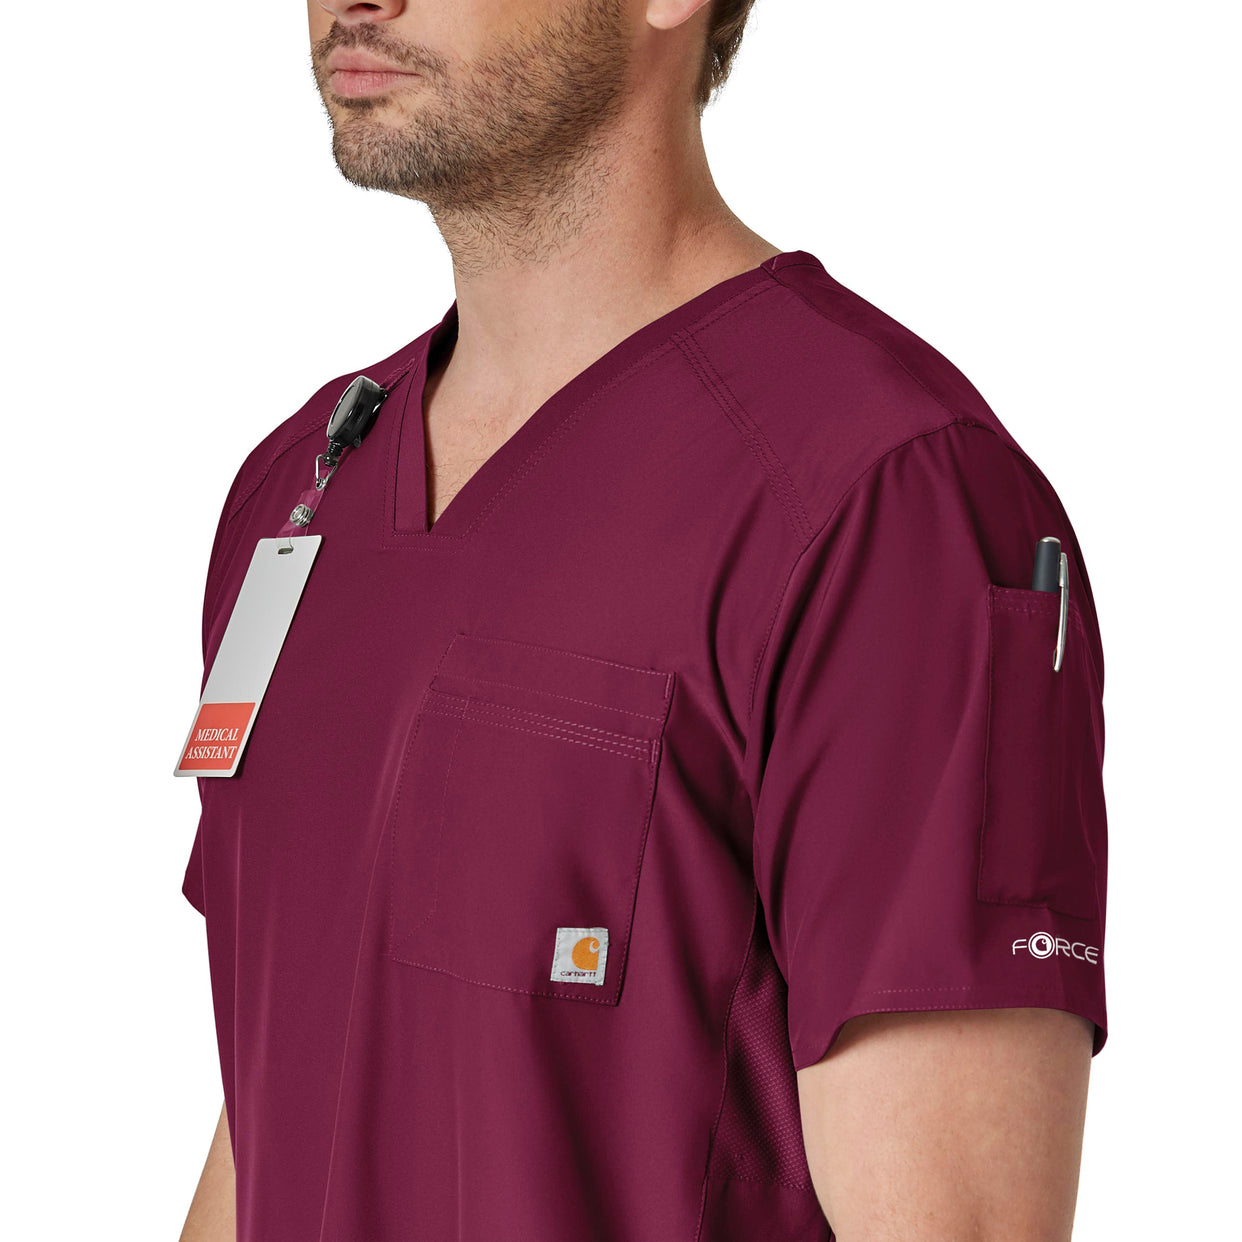 Force Liberty Men's Twill Chest Pocket Scrub Top Wine side view